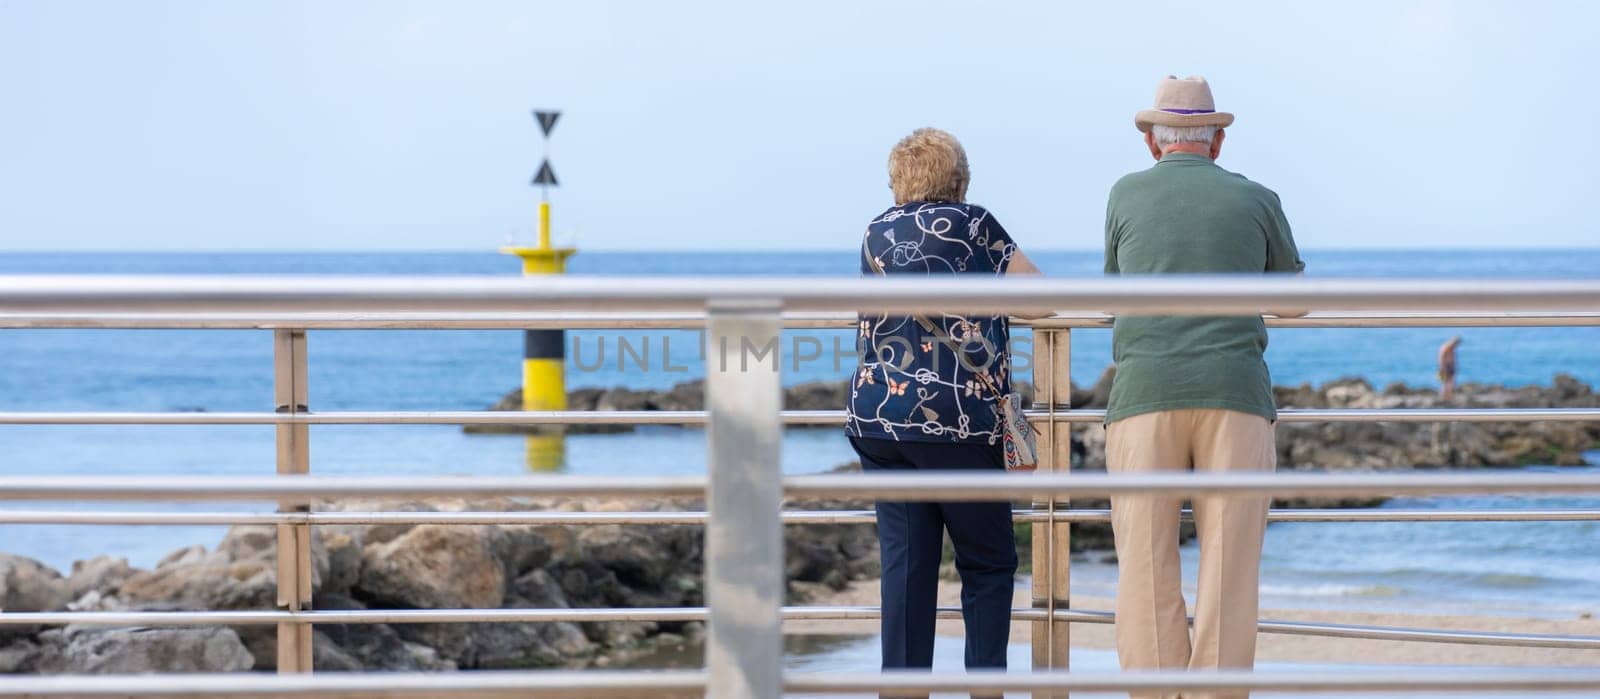 Captured in a tranquil moment, an elderly couple stands by the railing, overlooking the calm sea. The maritime beacon stands as a silent witness in the distance,